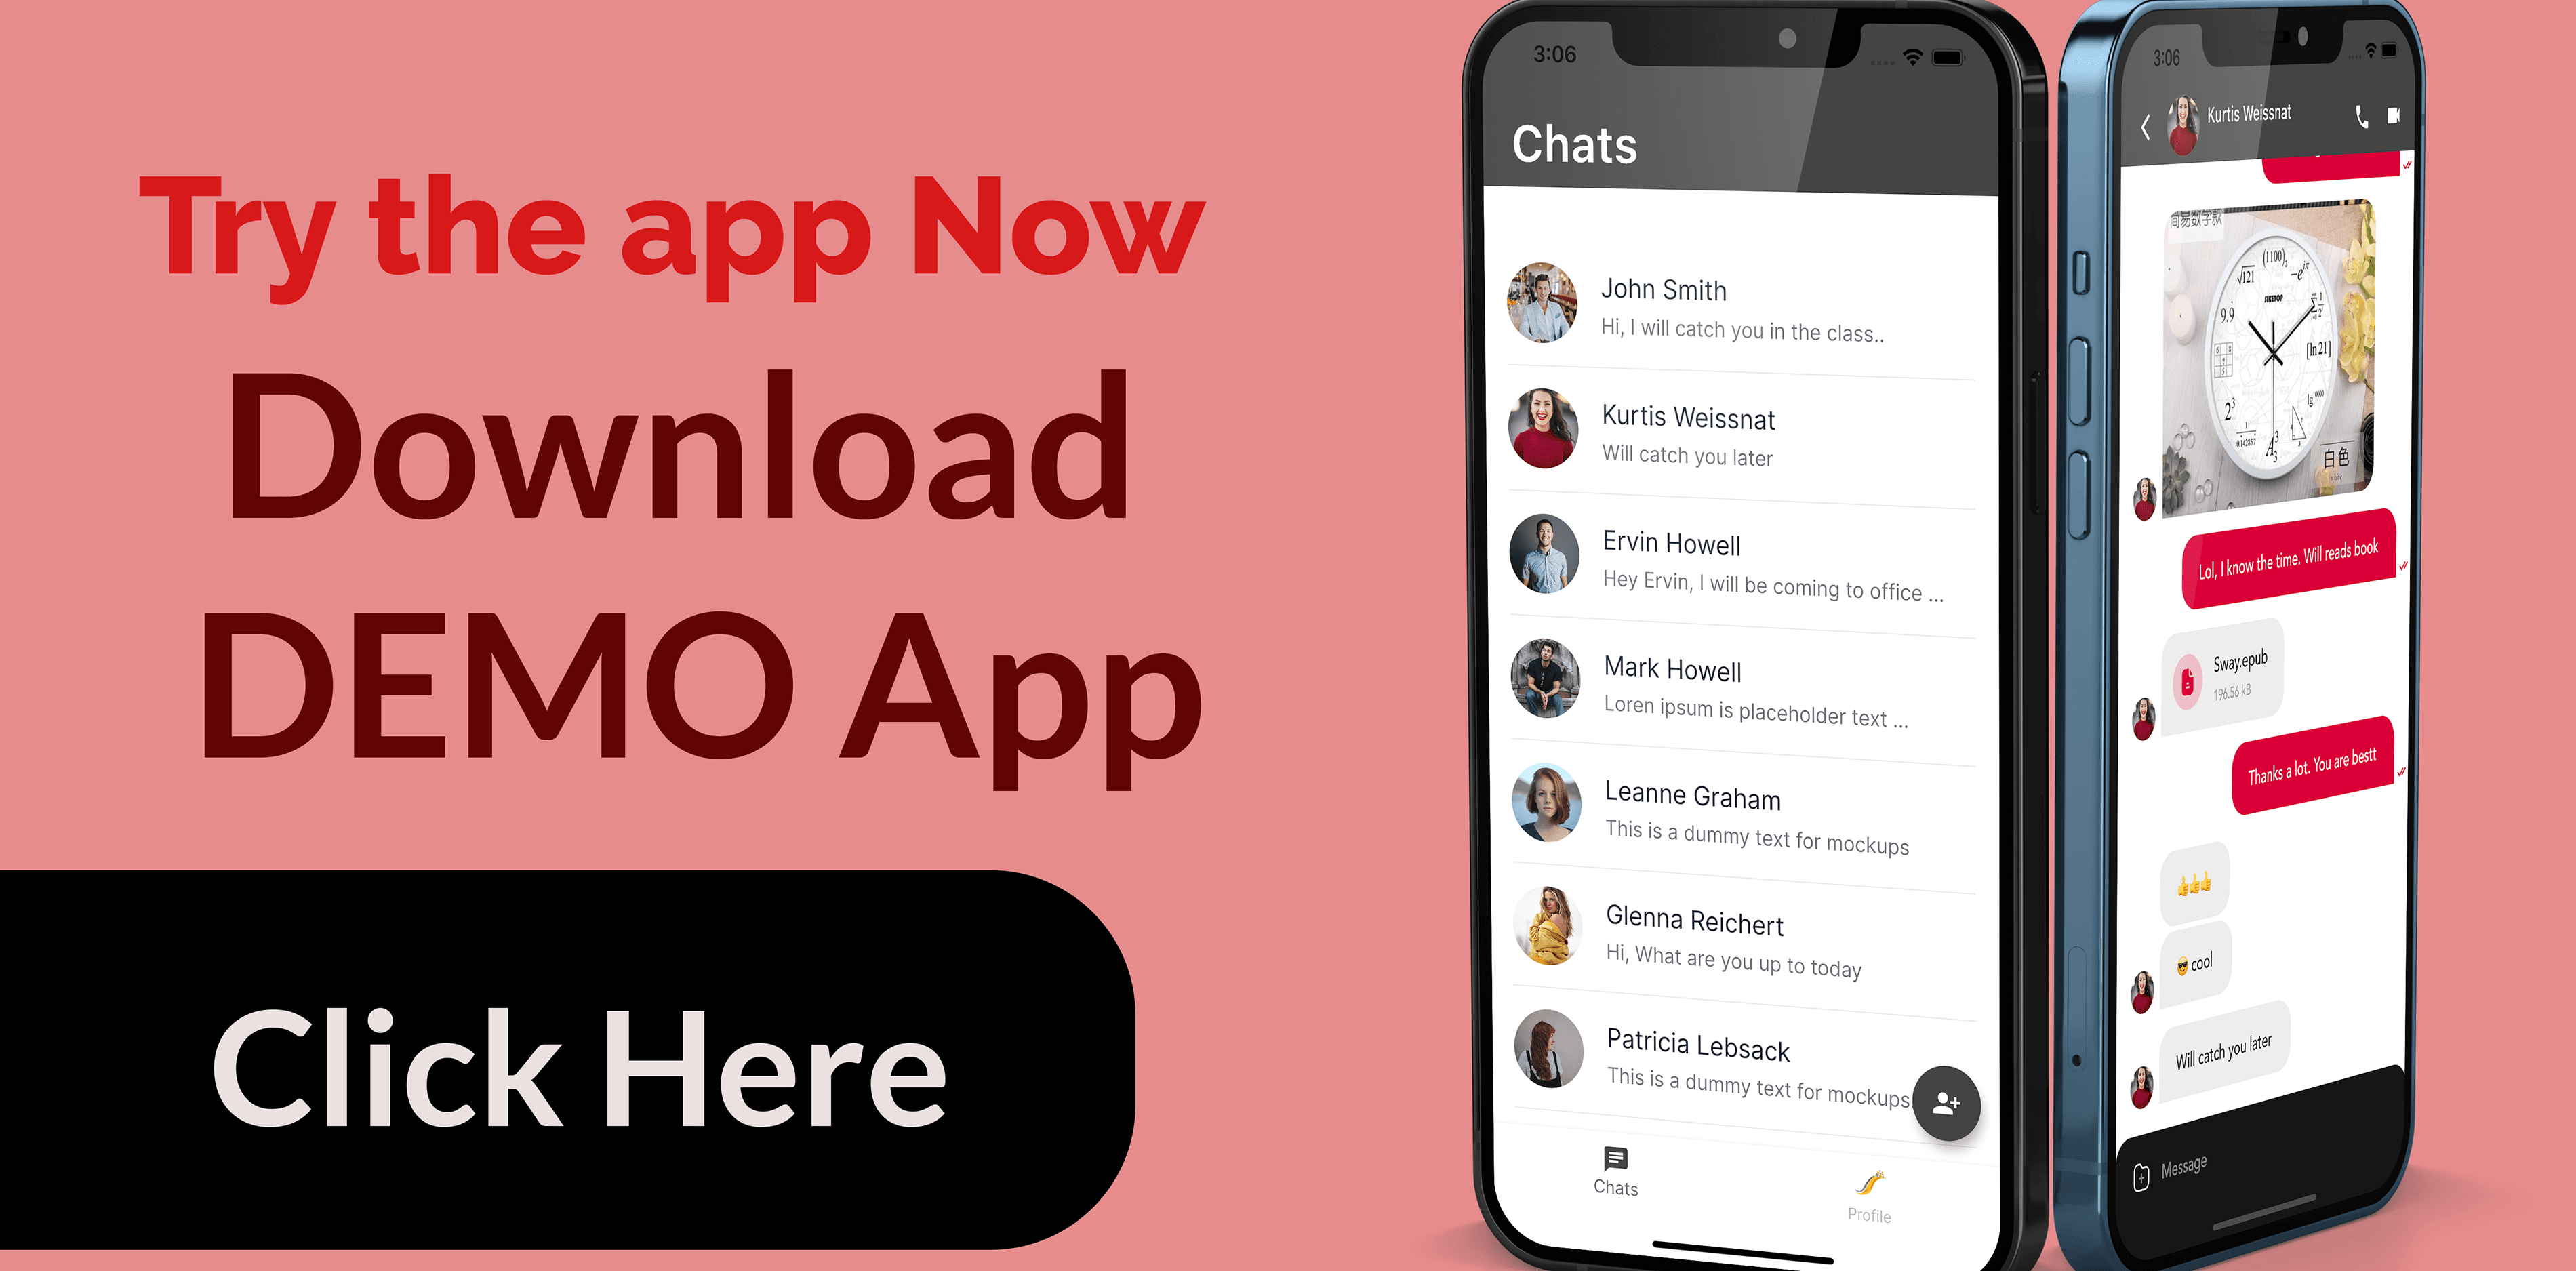 LiveChat - Flutter RealTime Chat App with No Database | Video & Voice Calling | Android & iOS - 3